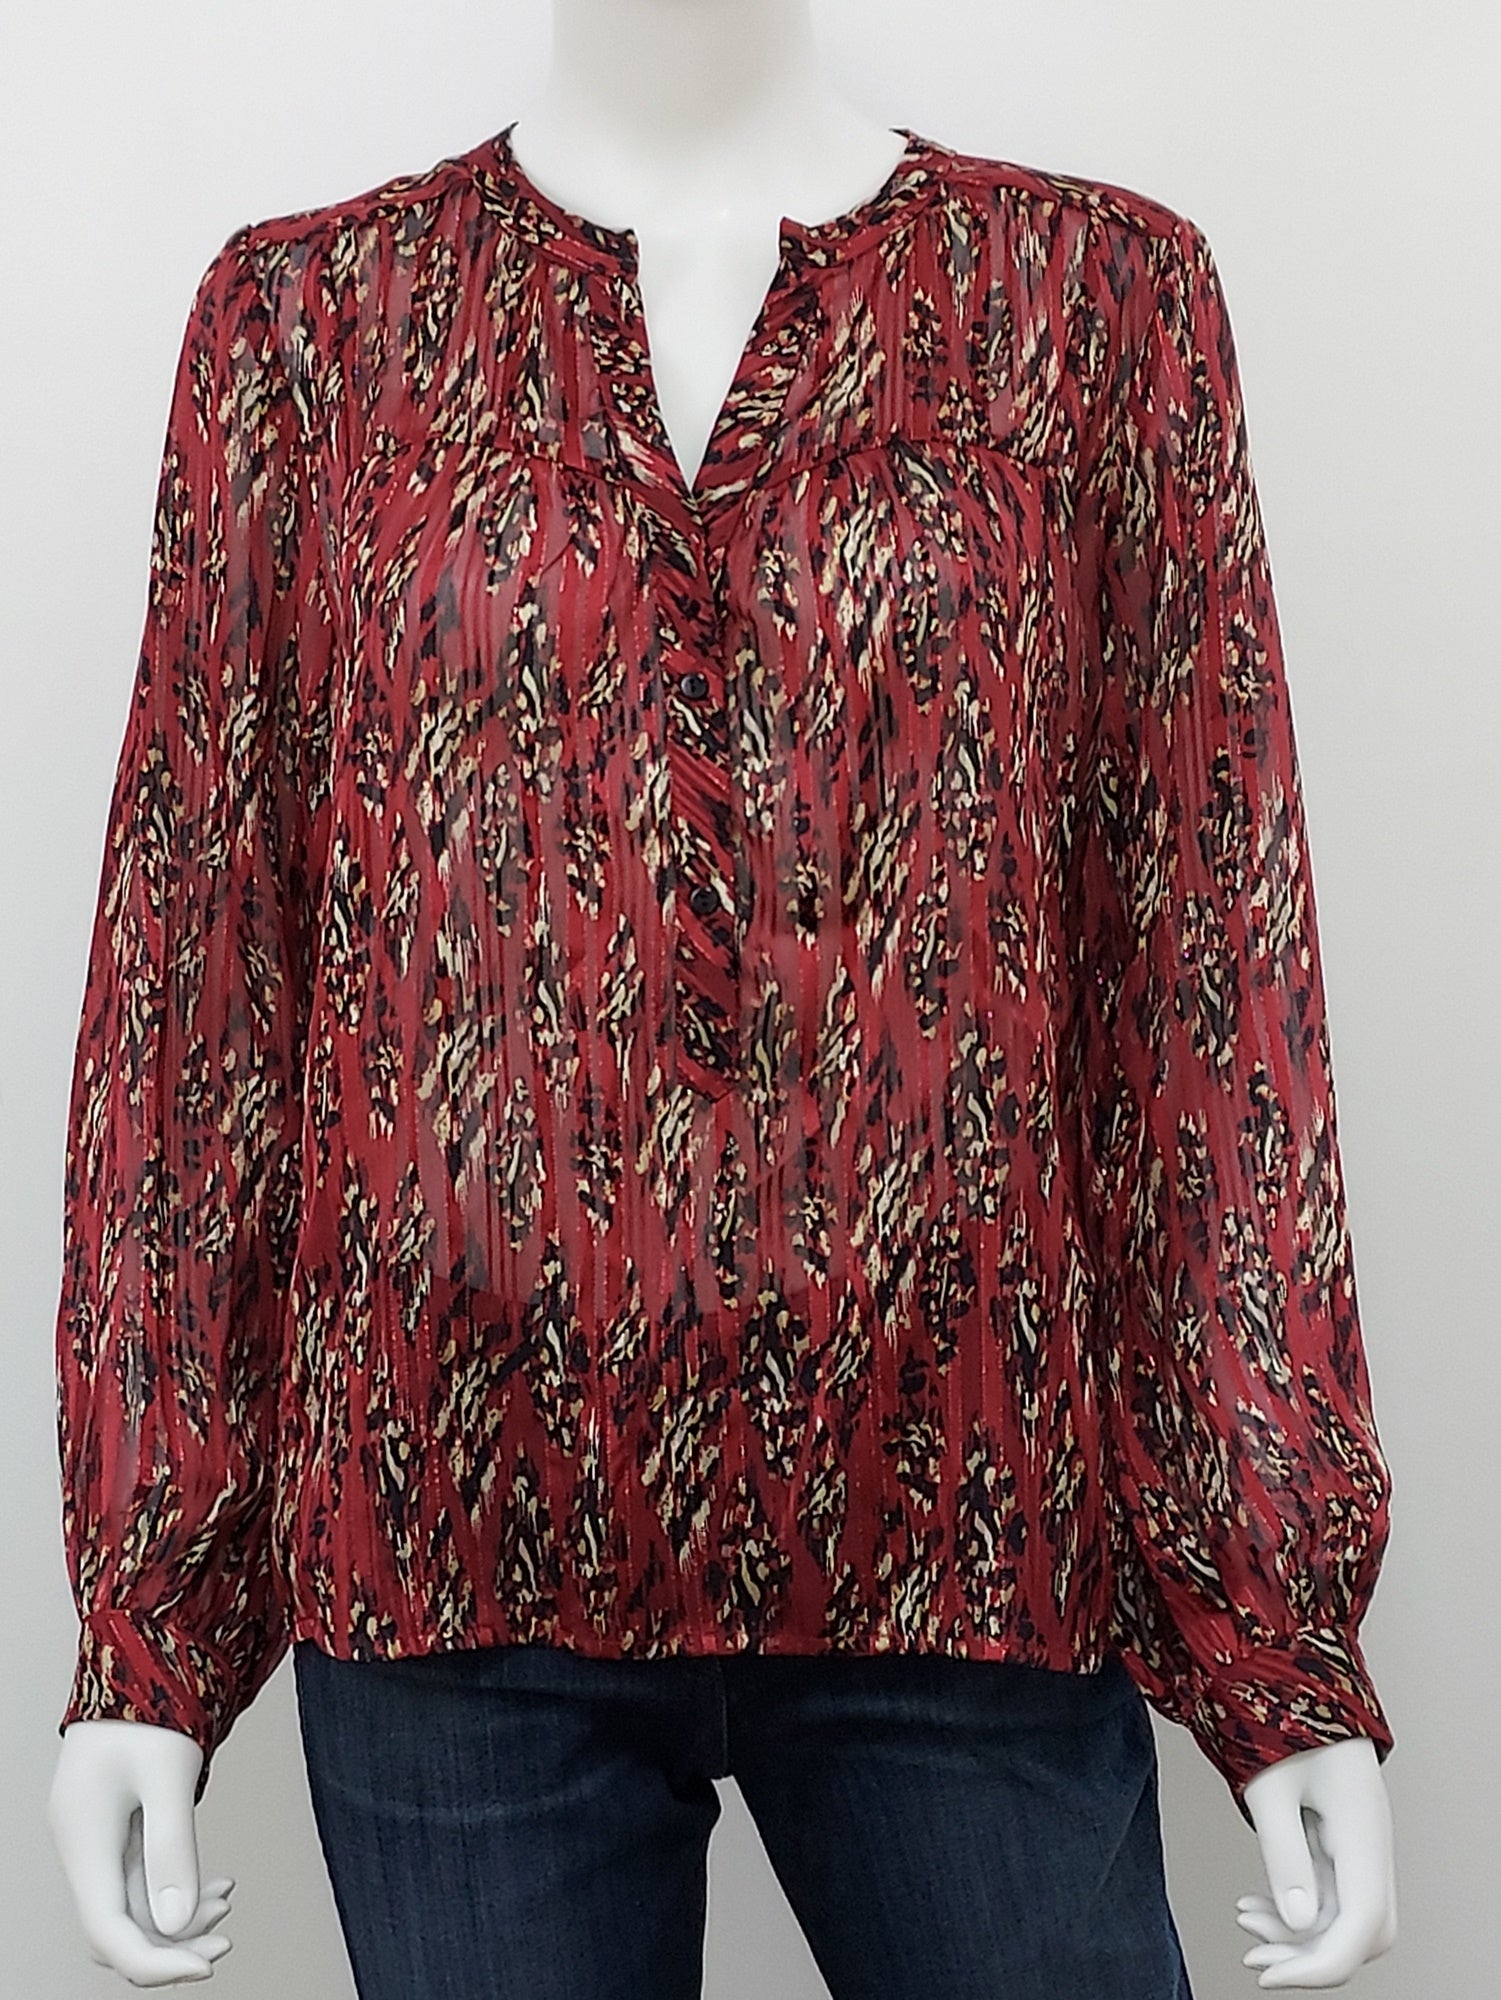 Printed Blouse Size Small